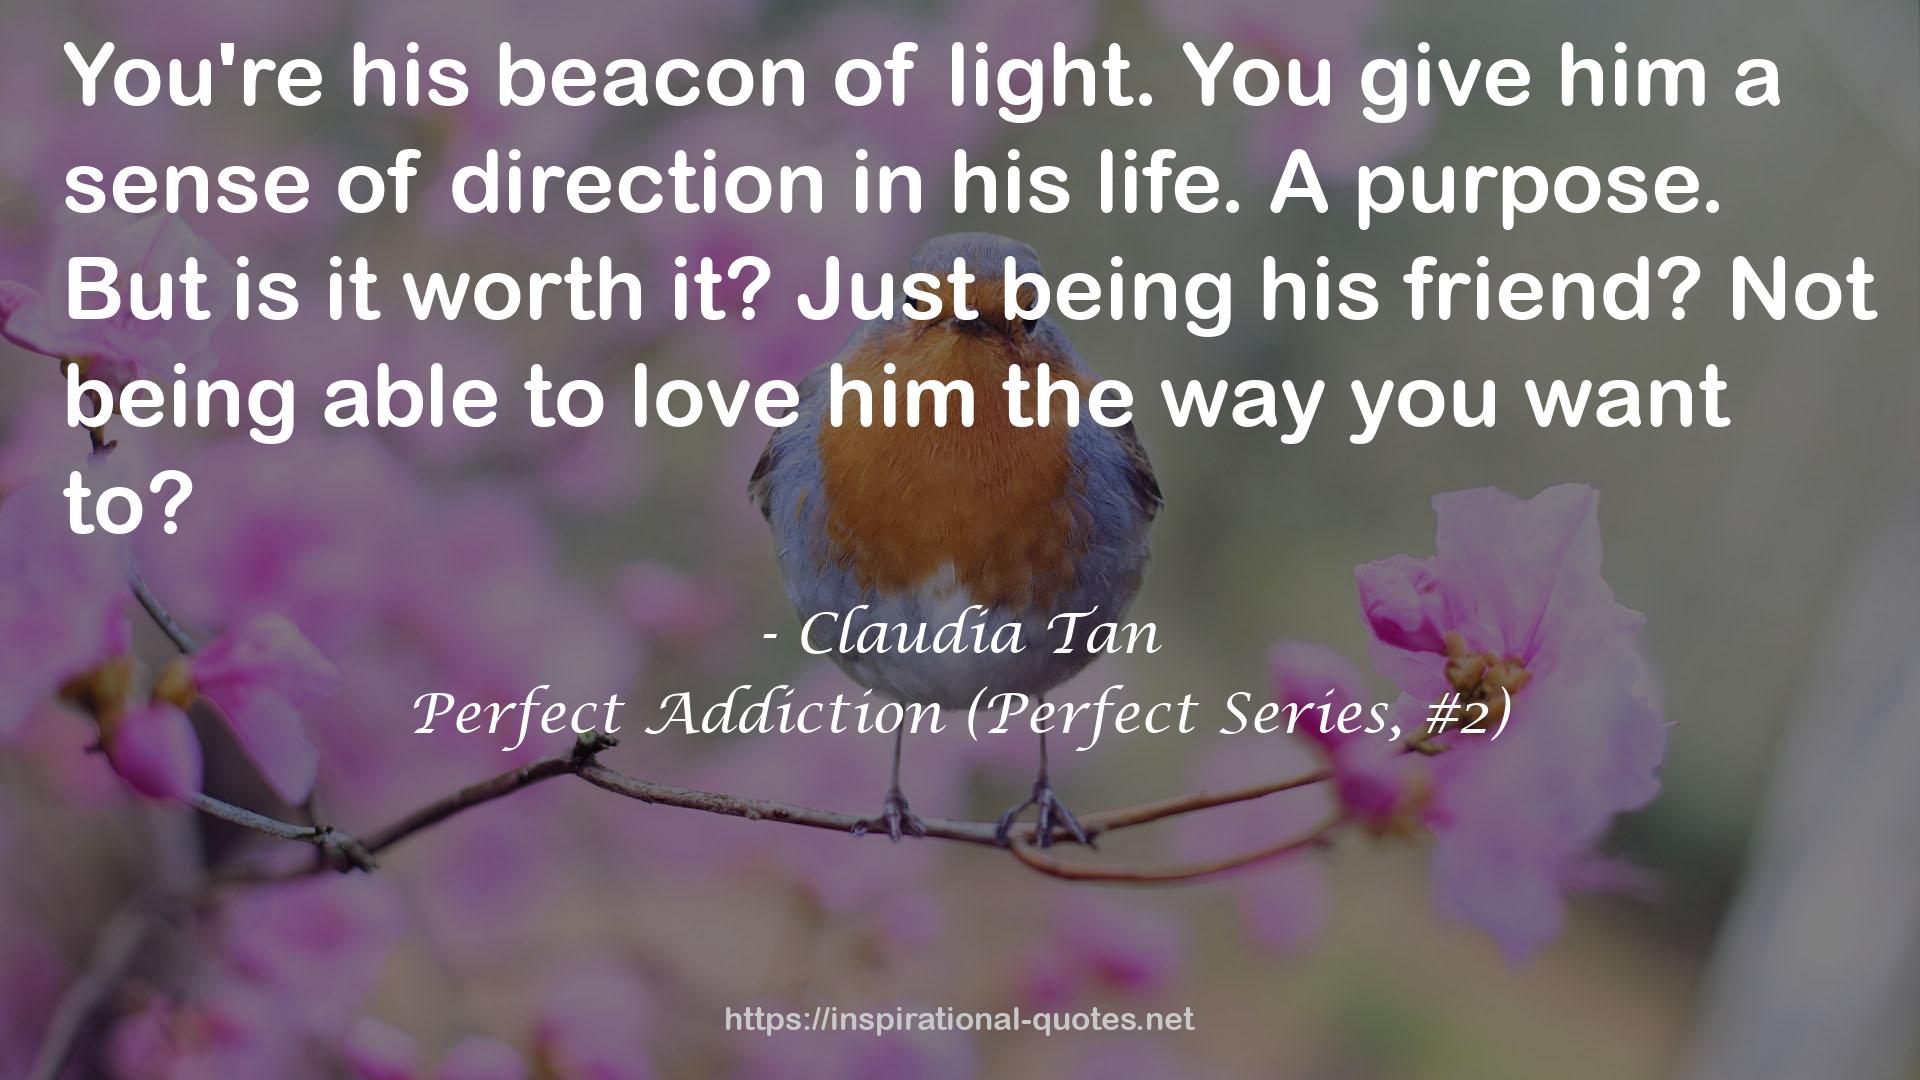 Perfect Addiction (Perfect Series, #2) QUOTES